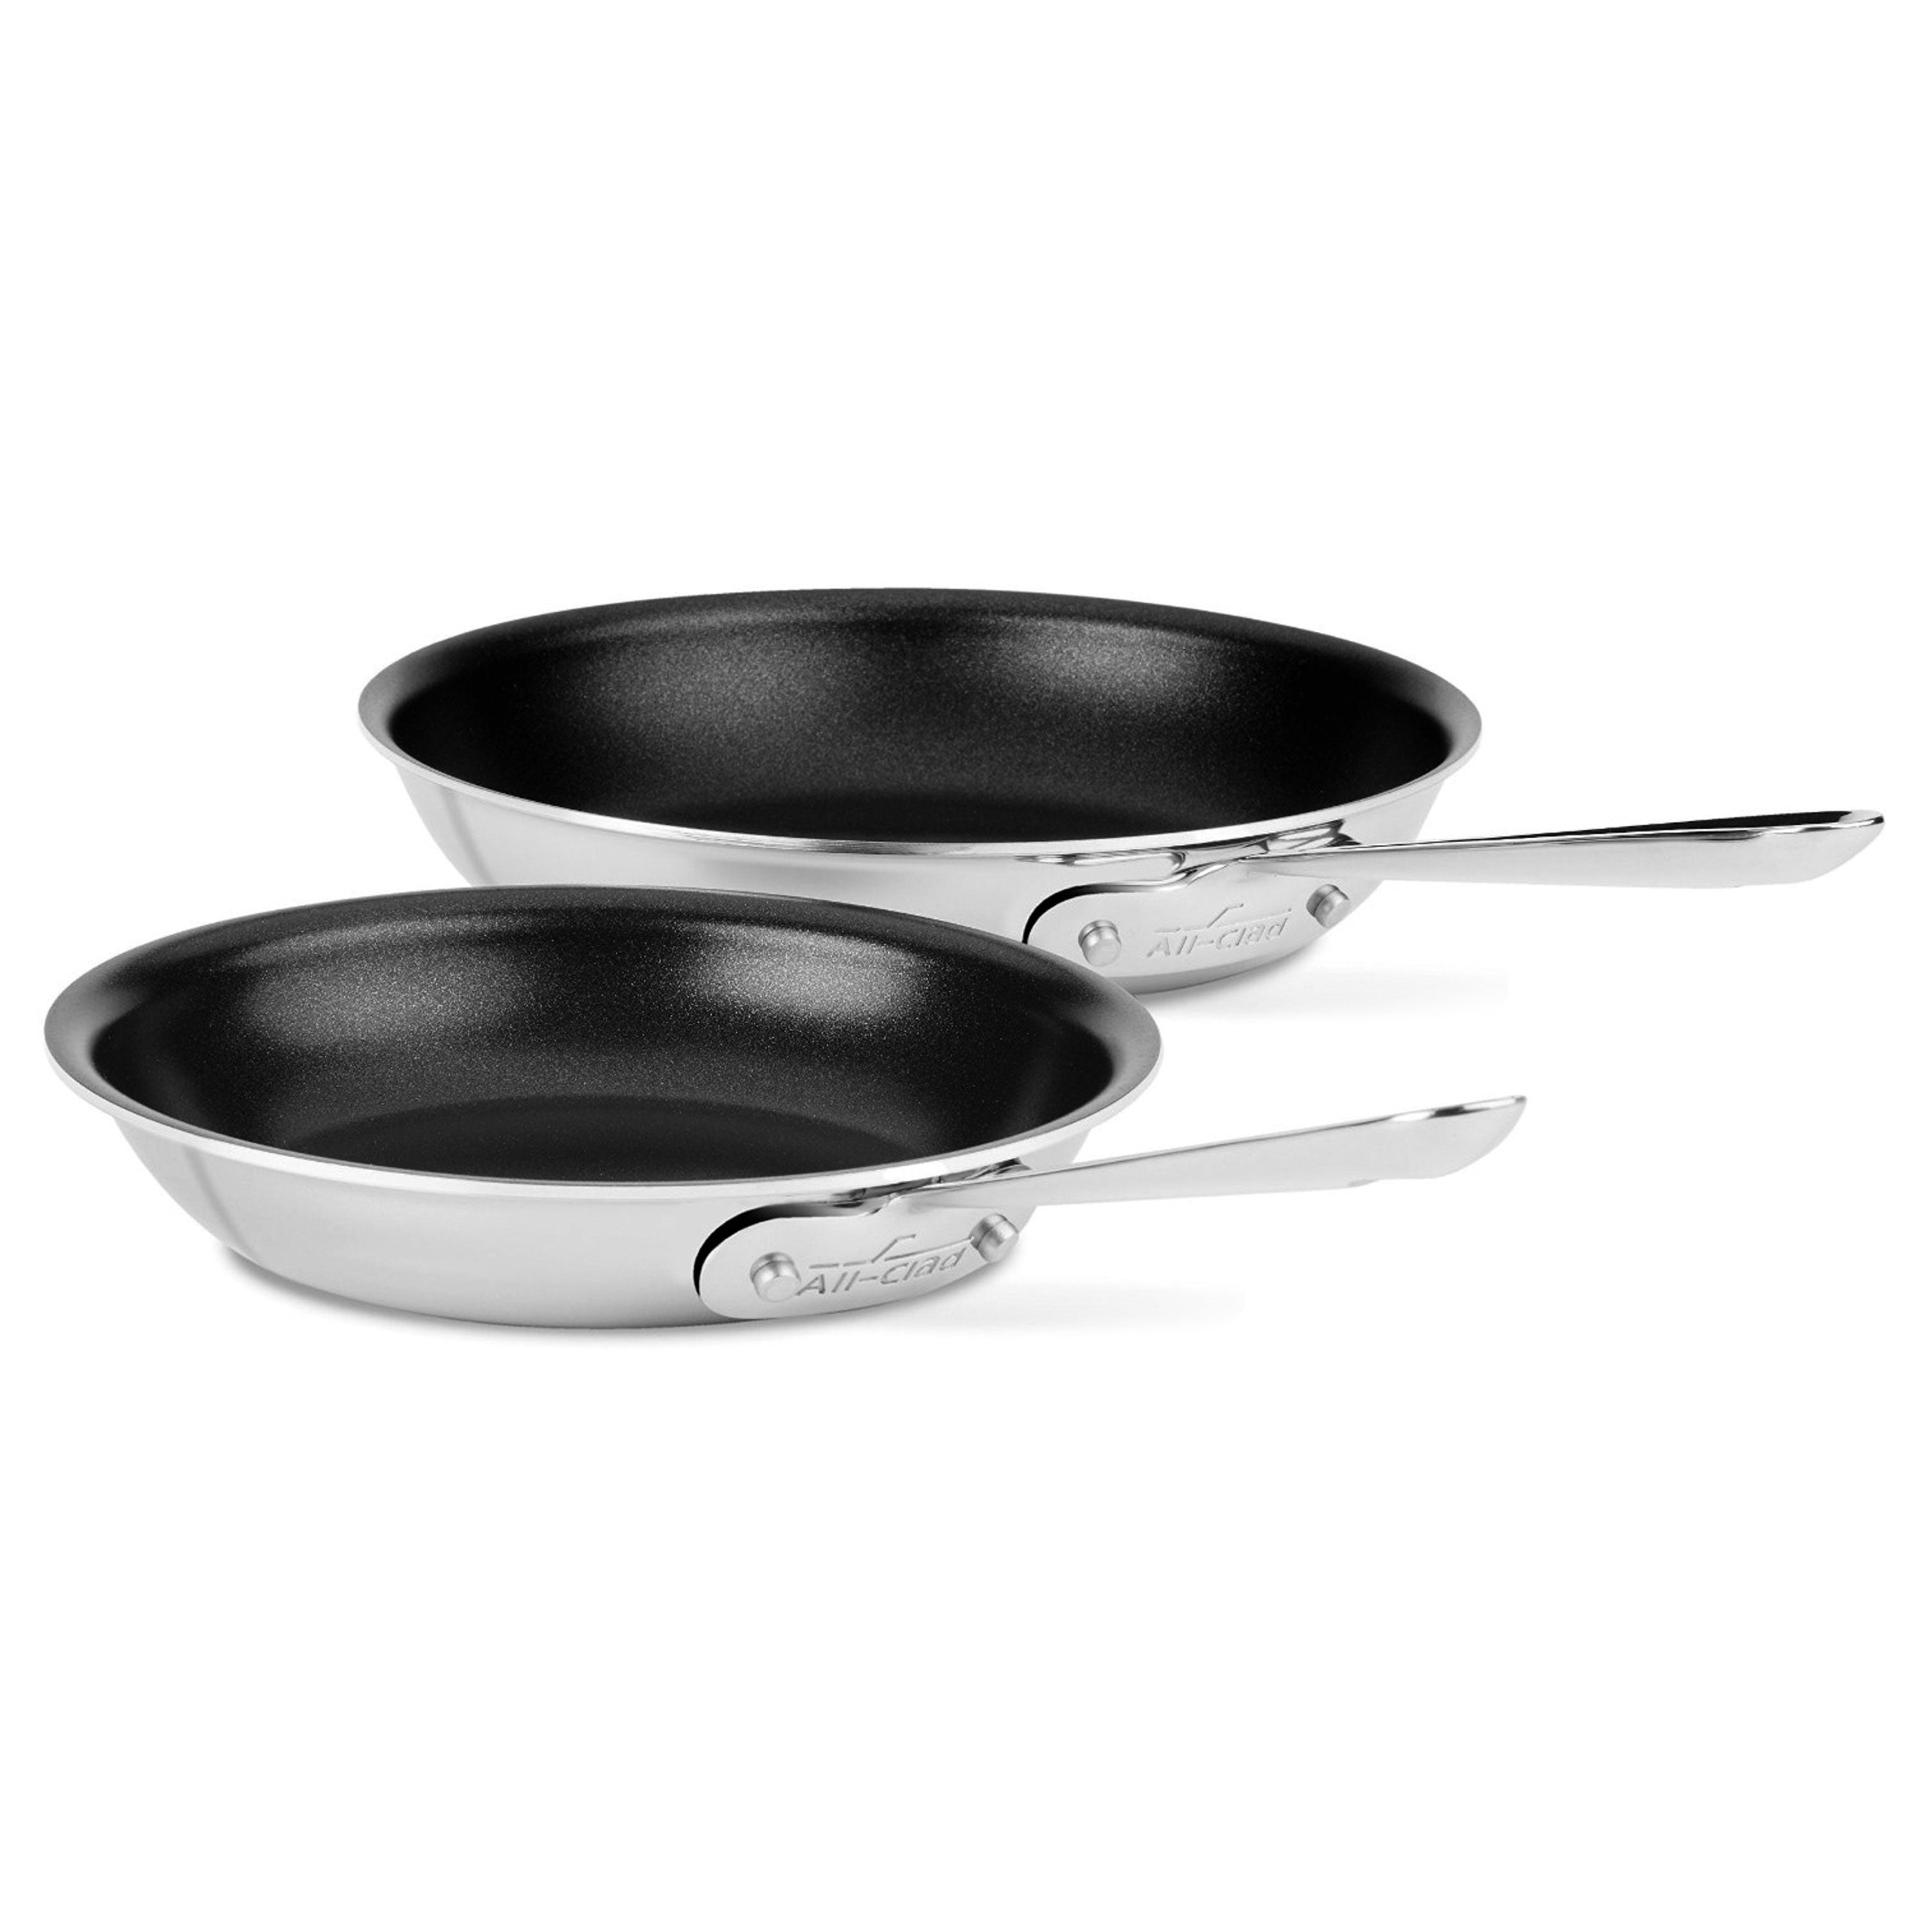 All-Clad Nonstick Fry Pan Stainless Commercial 8 inch / 21 CM